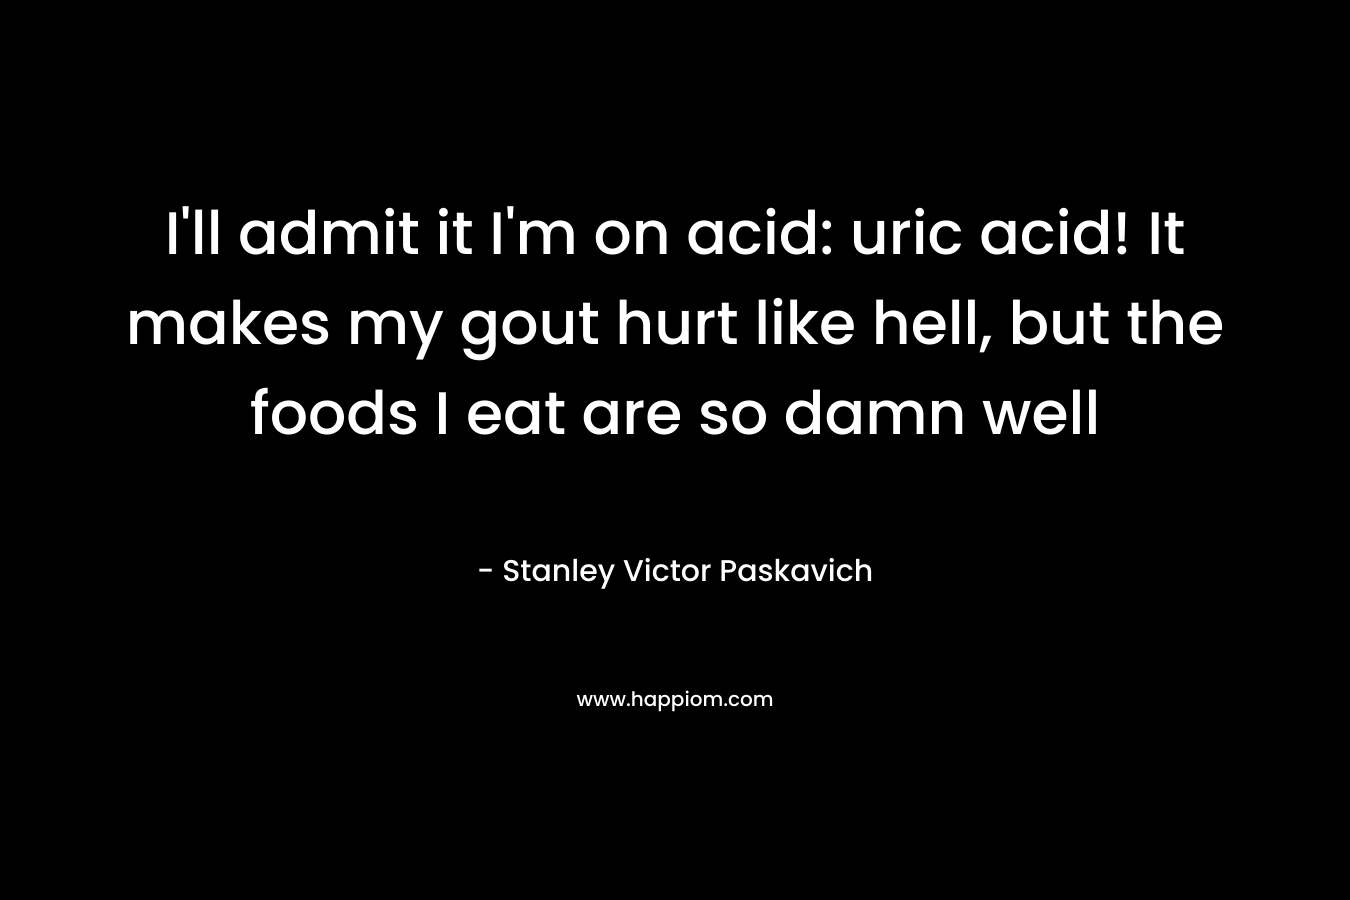 I’ll admit it I’m on acid: uric acid! It makes my gout hurt like hell, but the foods I eat are so damn well – Stanley Victor Paskavich